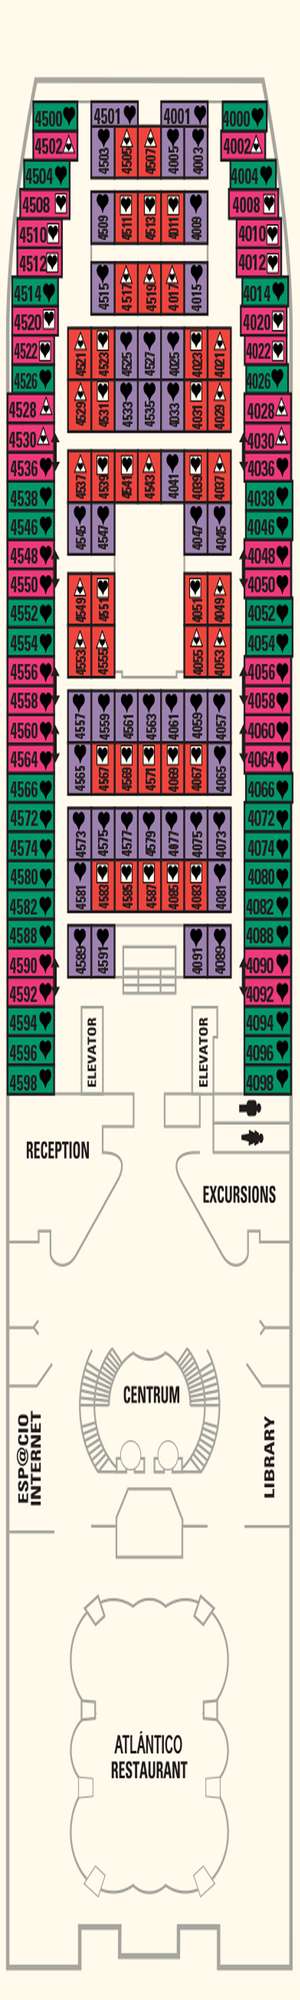 Deck plan for Sovereign